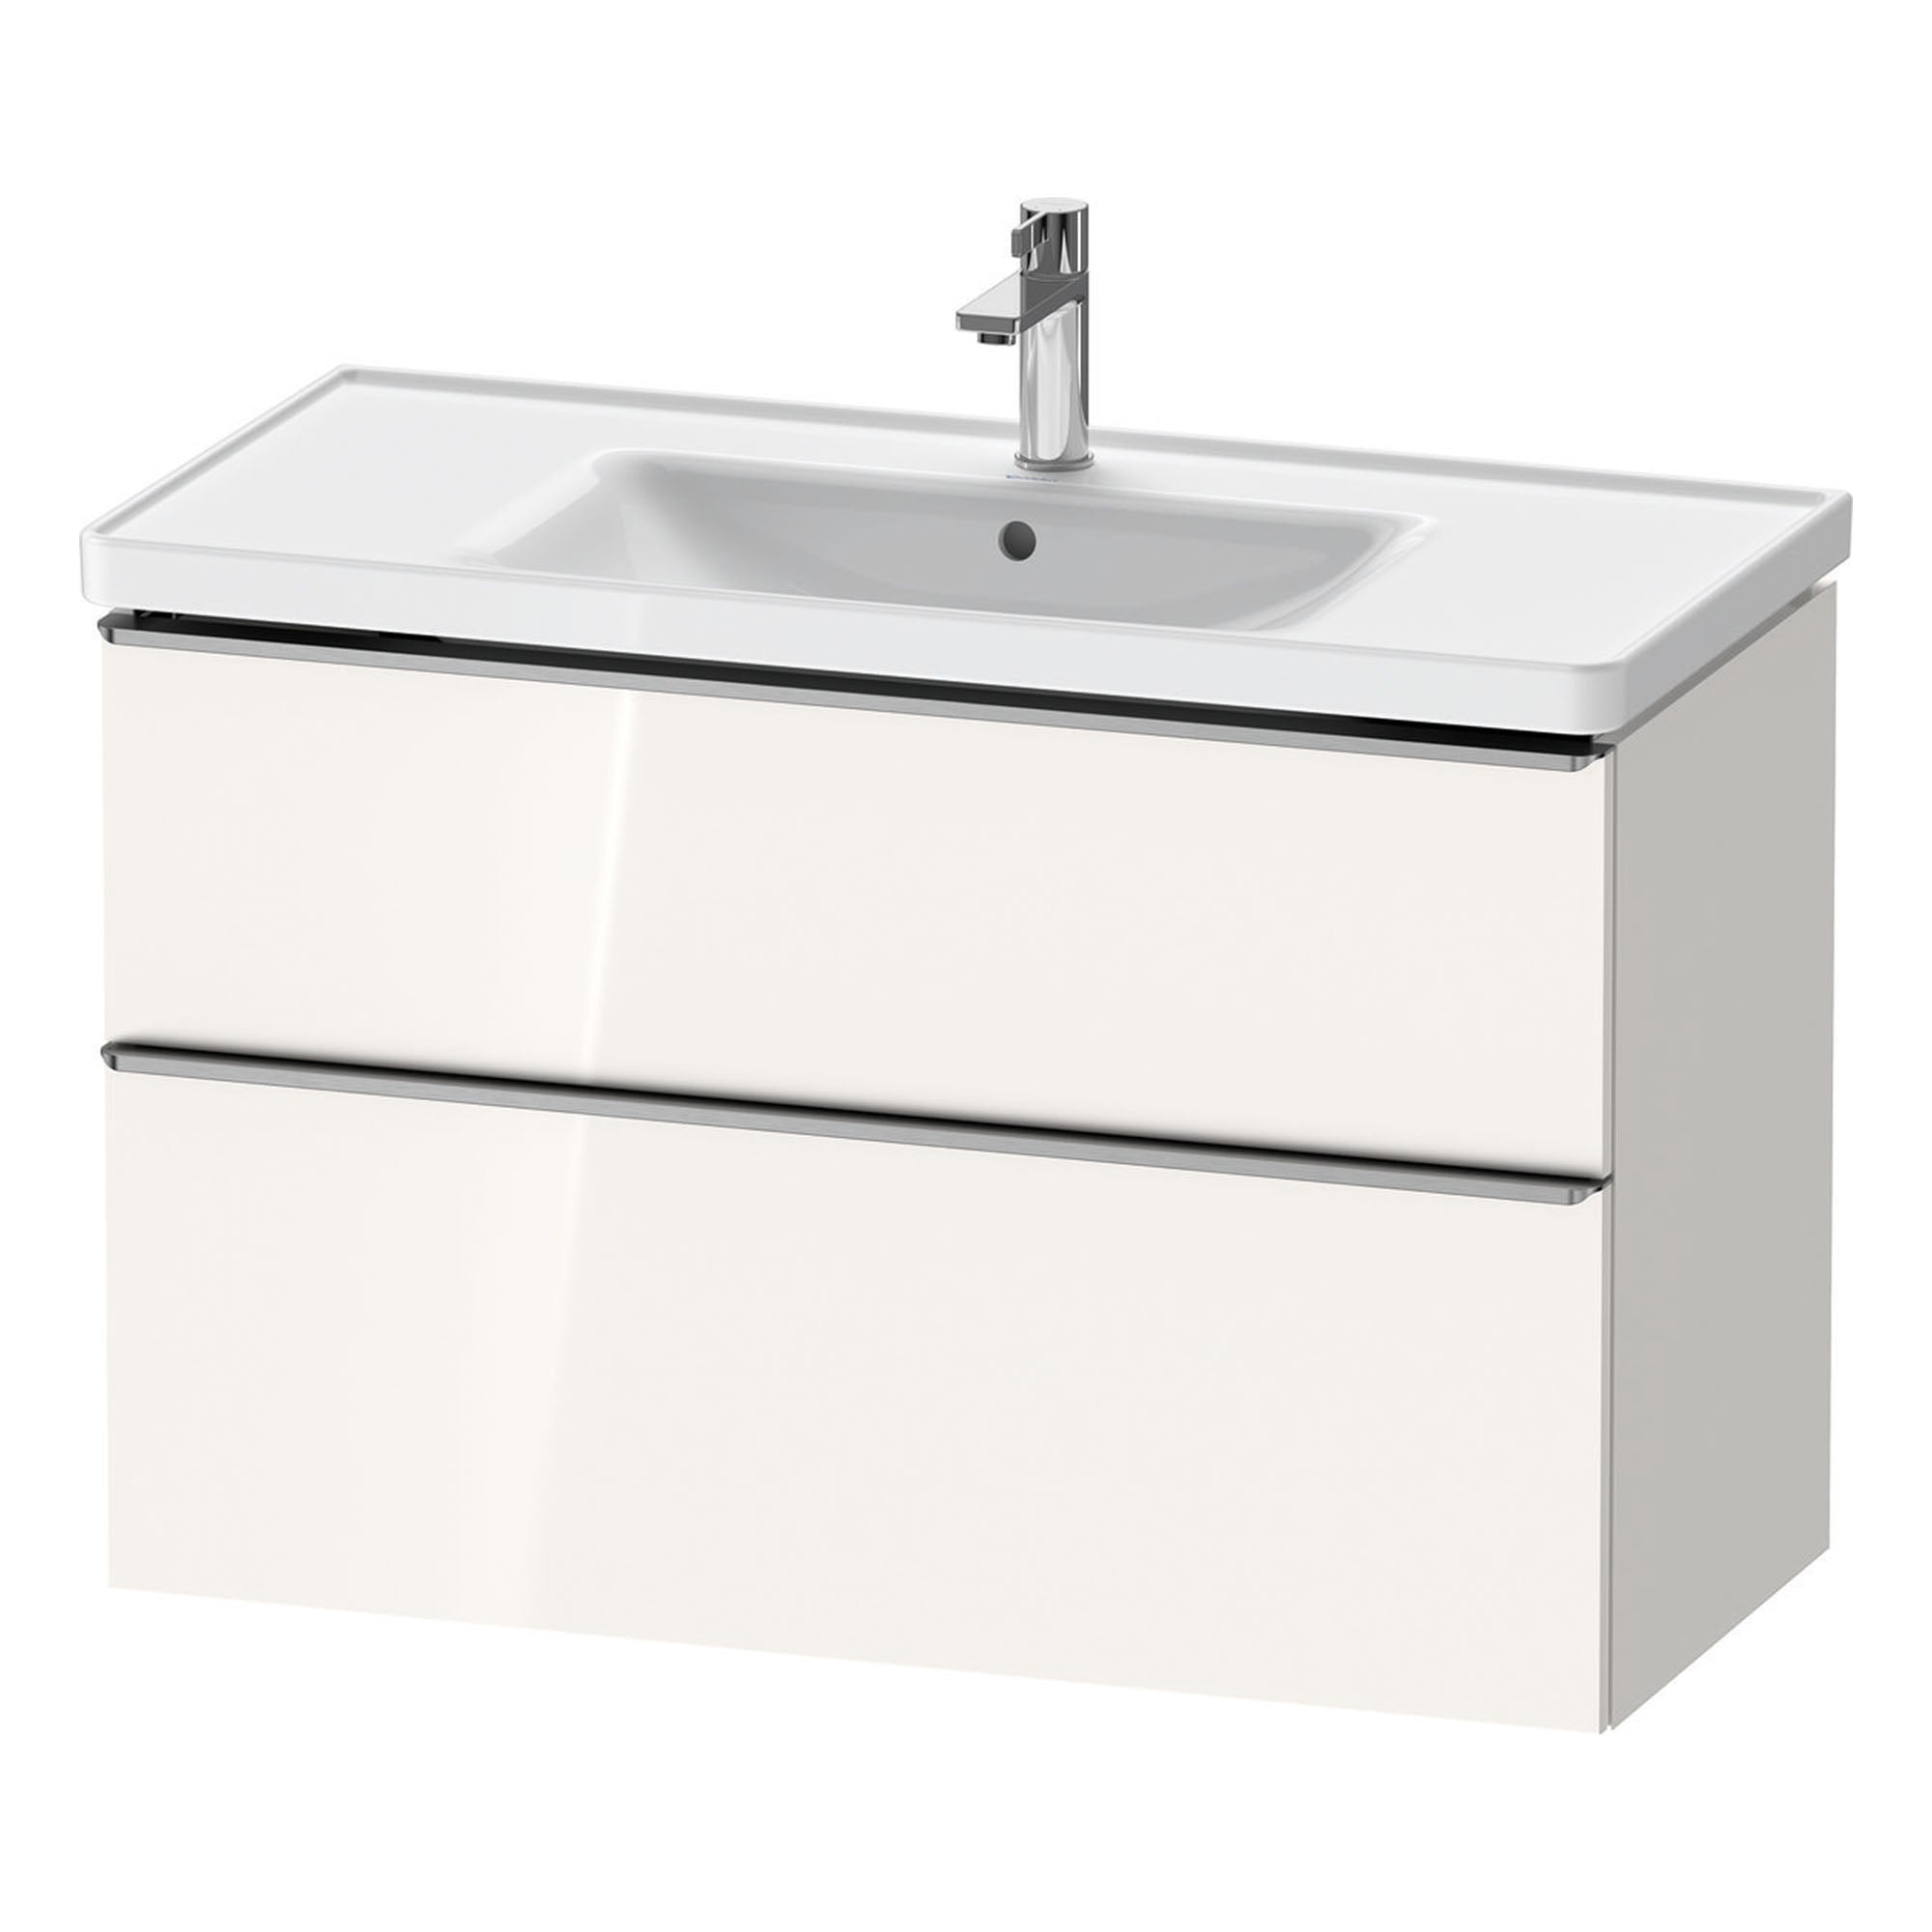 duravit d-neo 1000mm wall mounted vanity unit with d-neo basin gloss white stainless steel handles